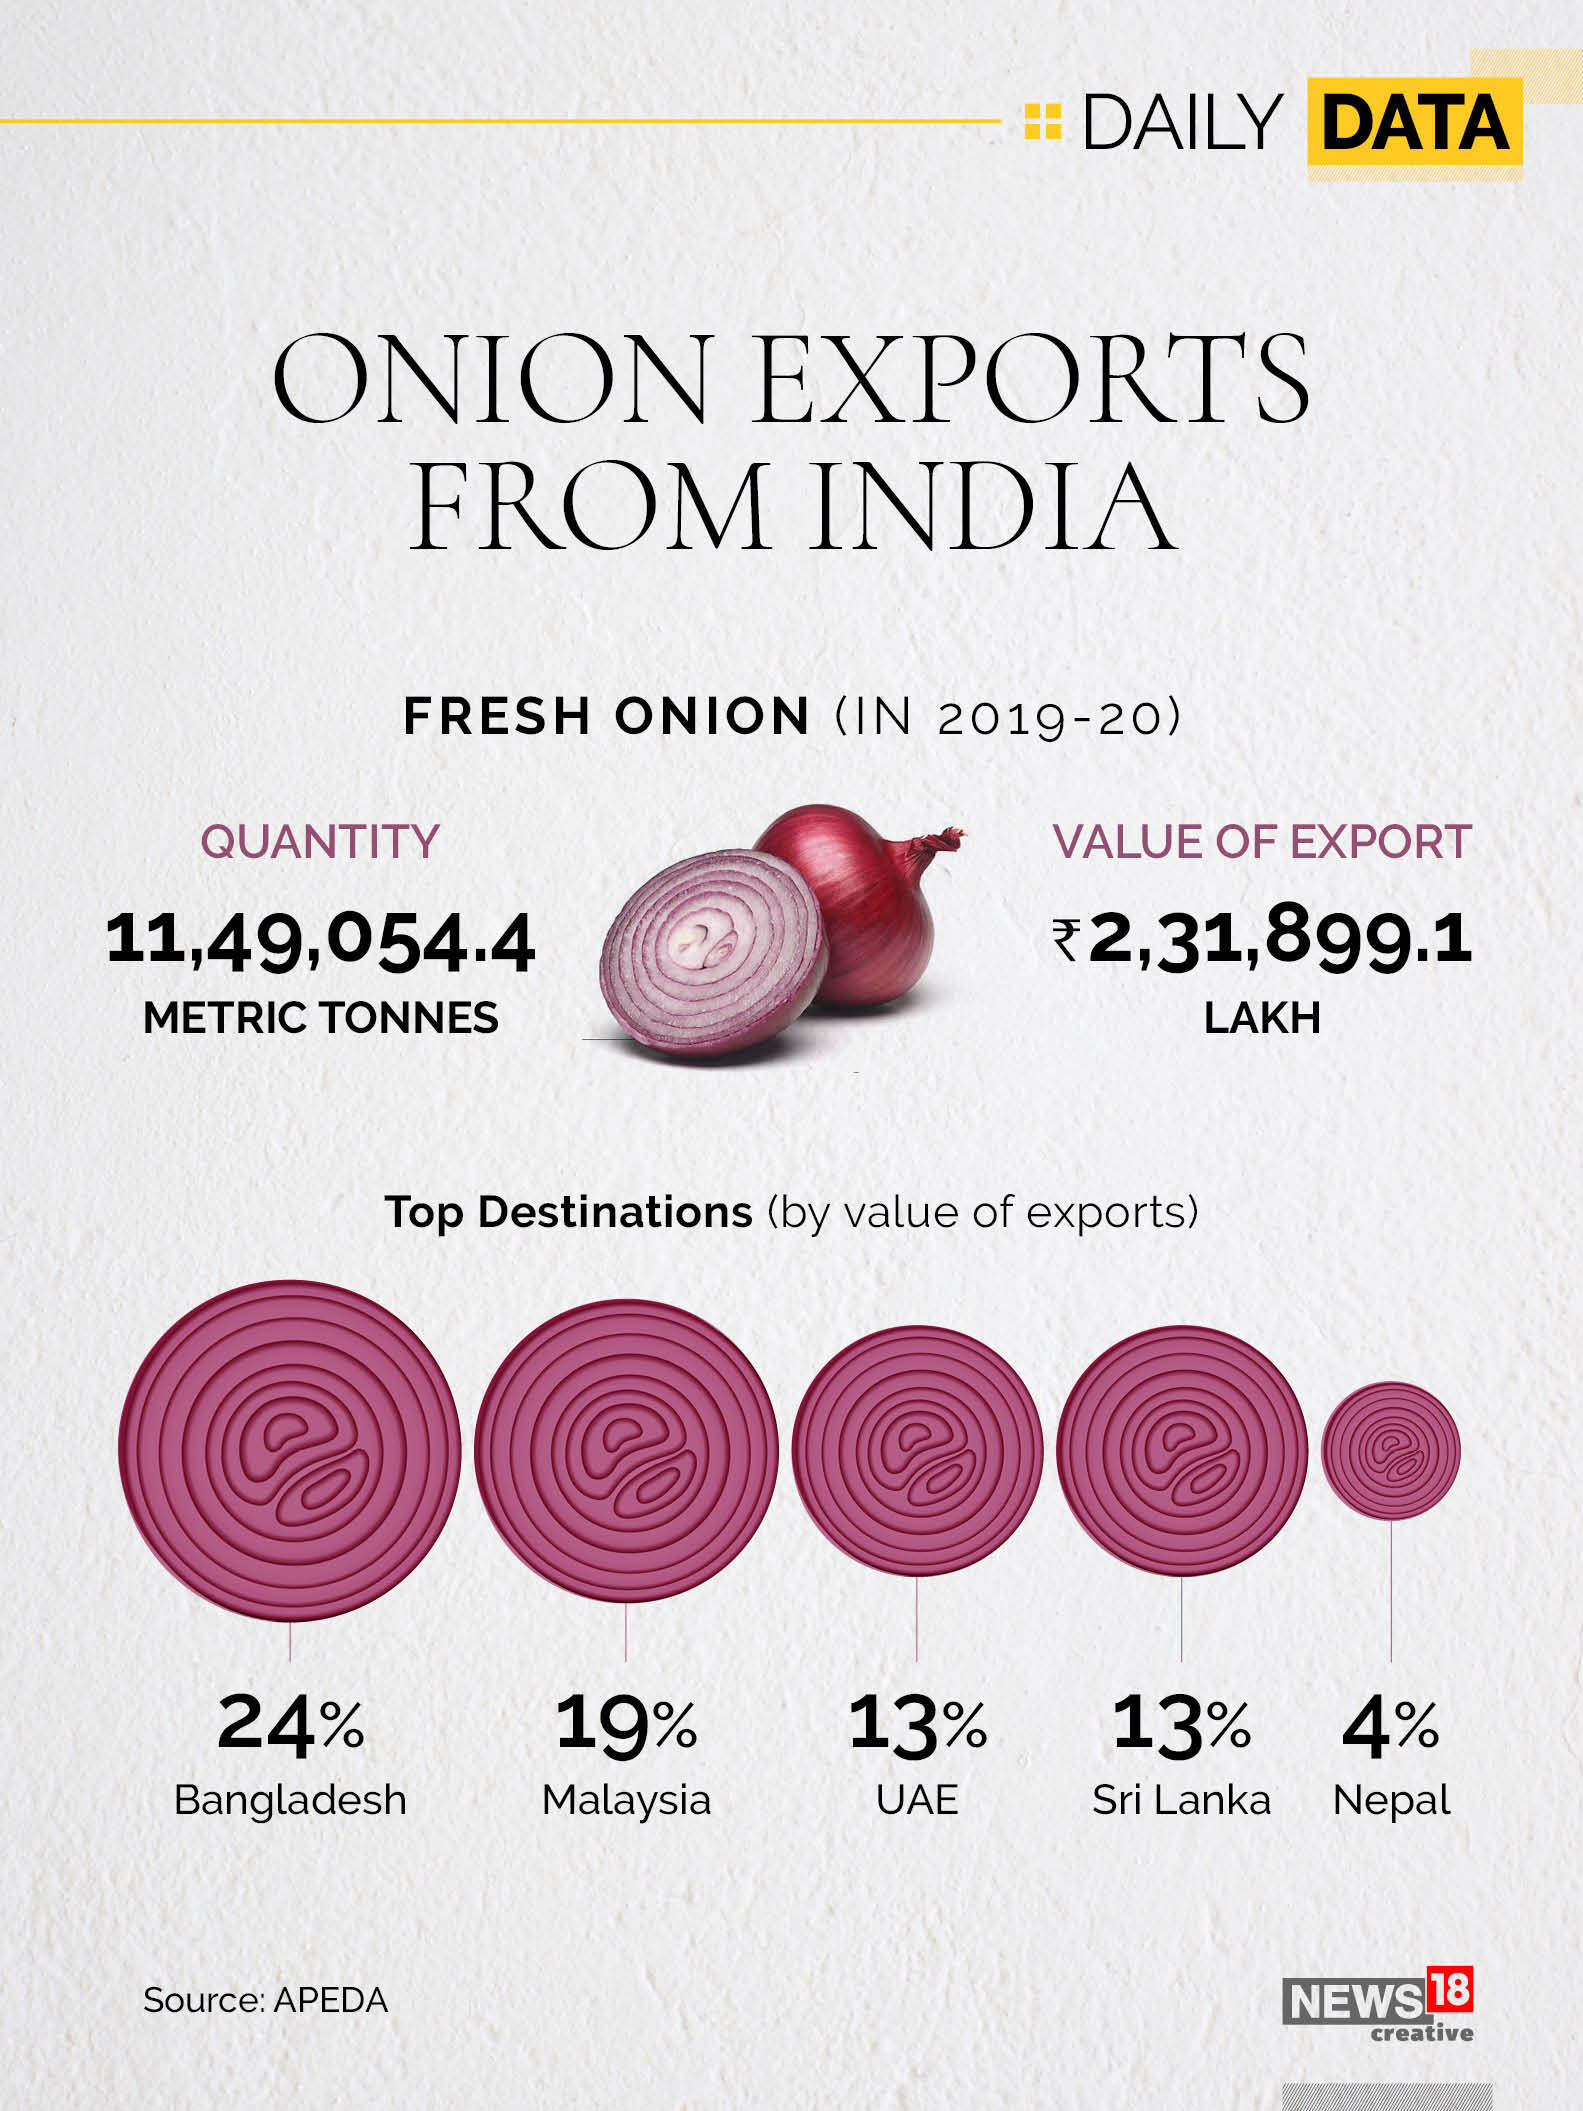 FAQ: WHY WAS A 40% DUTY IMPOSED ON ONION EXPORTS?